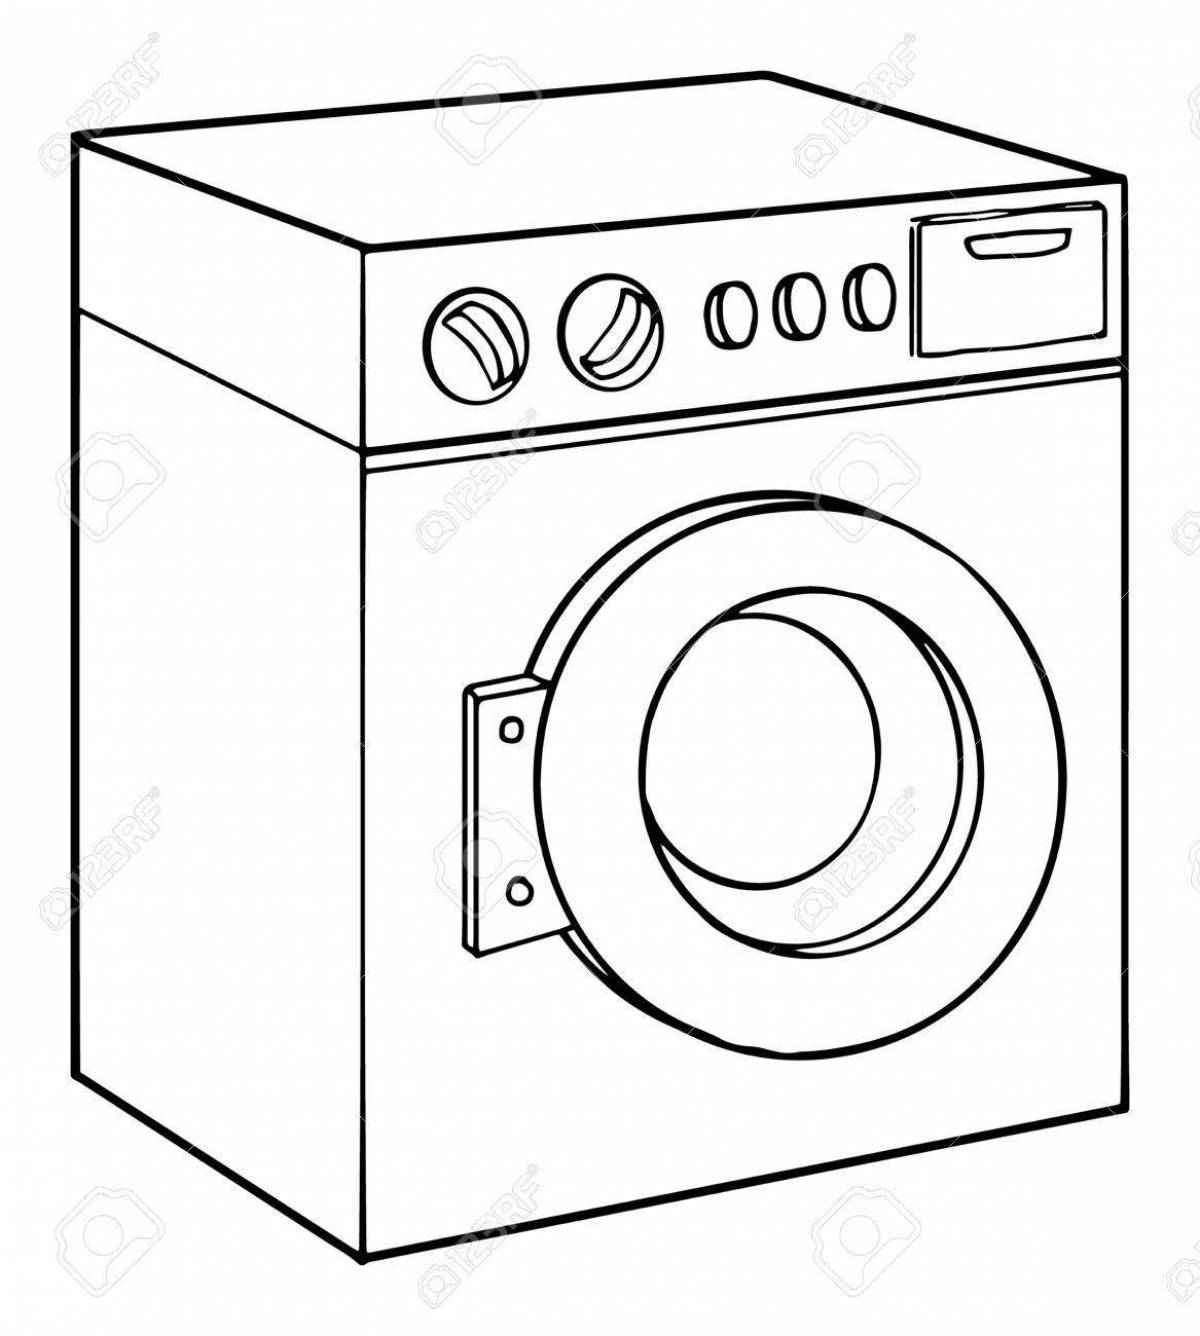 Fun coloring for laundry